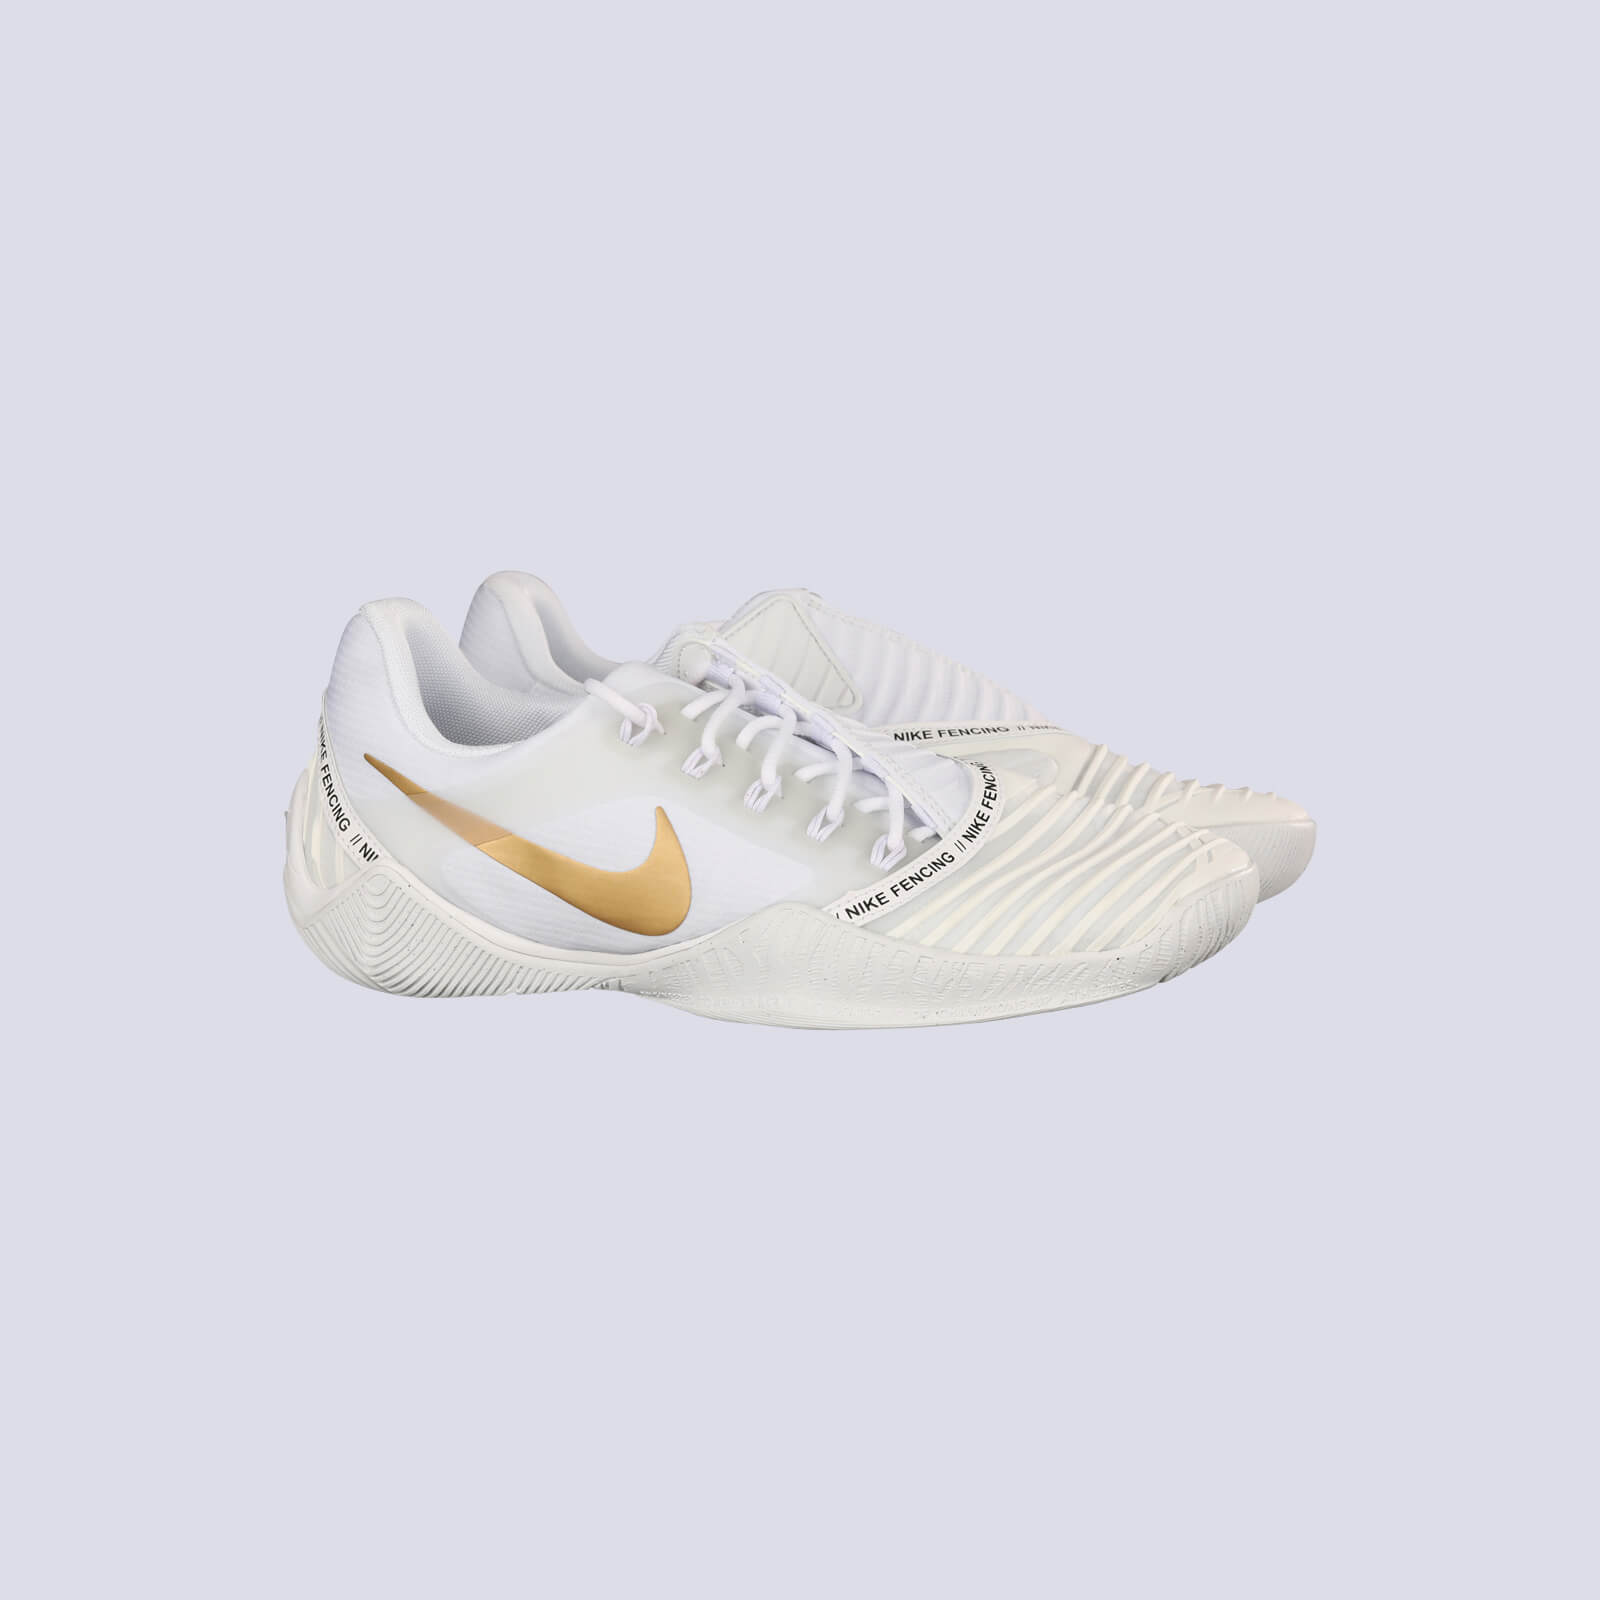 Fencing shoes Nike 2 - PRIEUR Sports